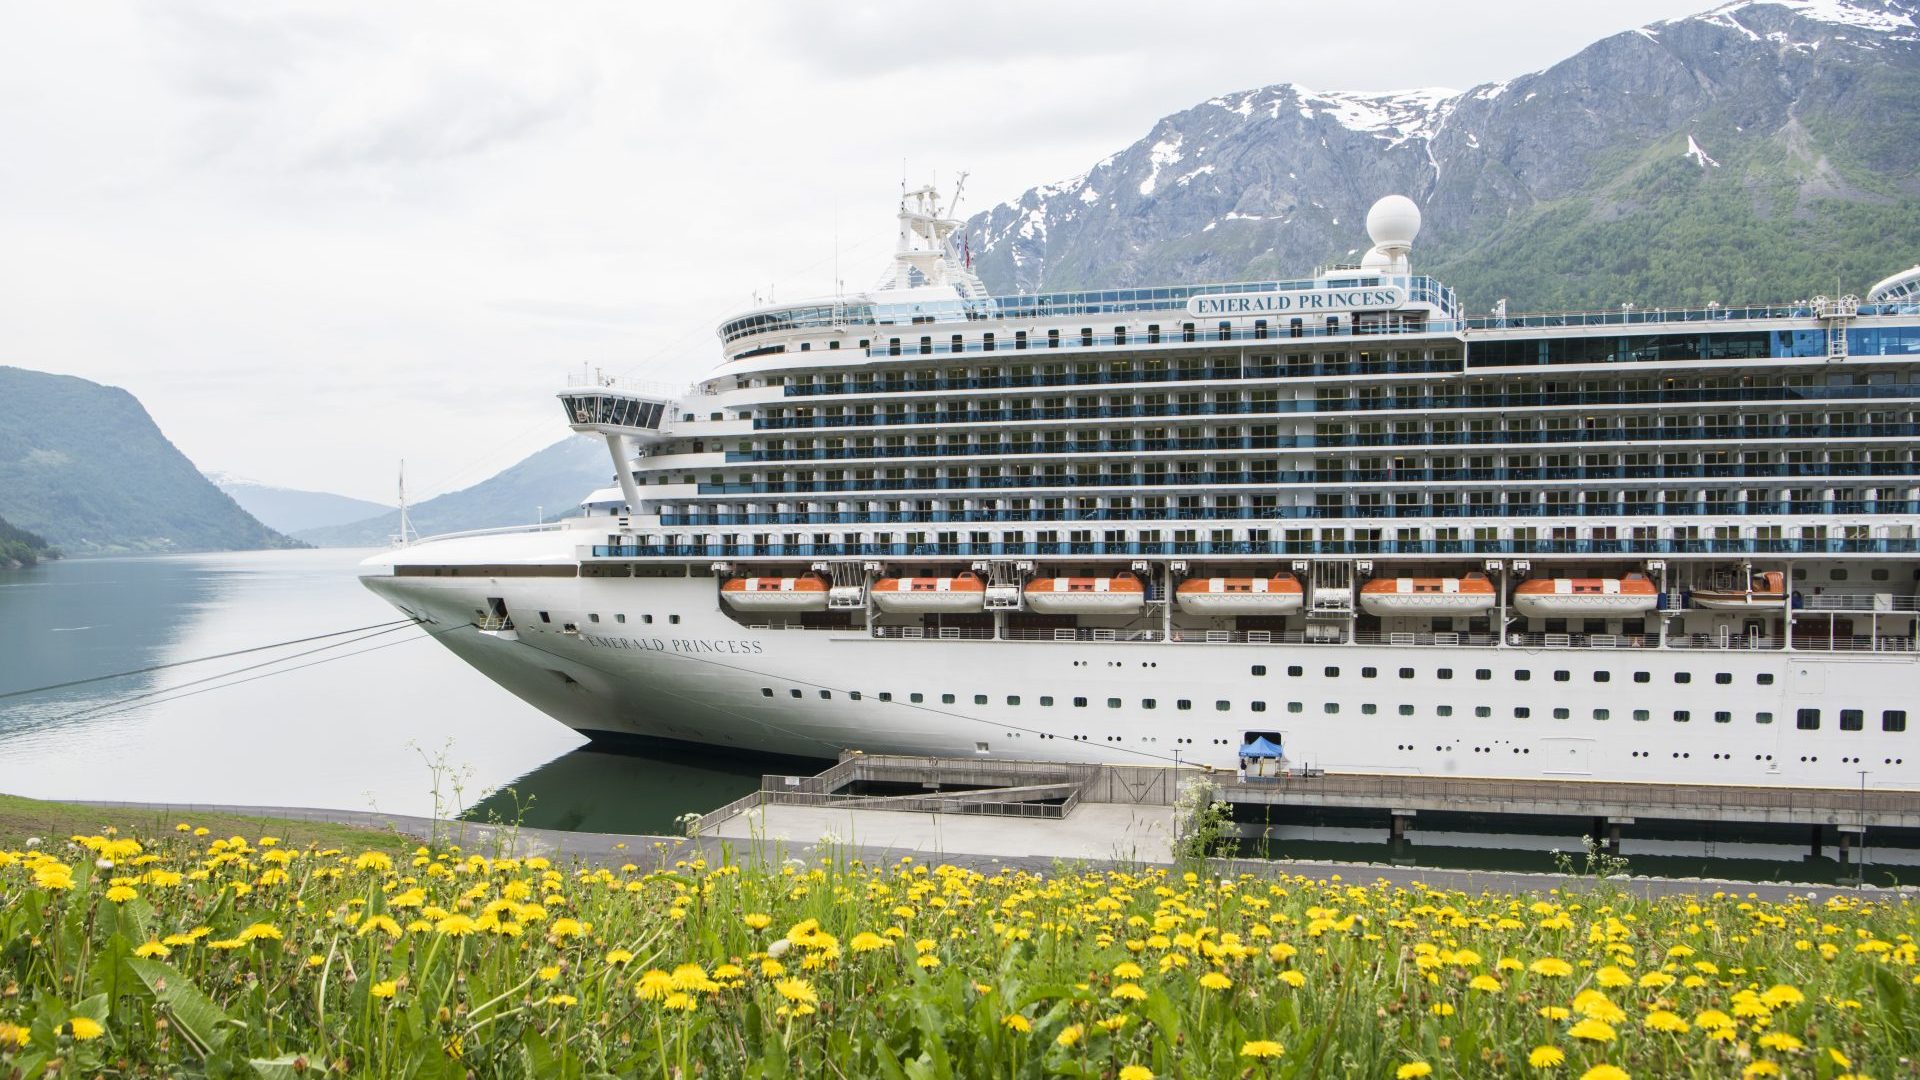 The Emerald Princess docks in Bergen, Norway.
A potential ban on cruise ships entering the fjords has now been shelved until at least 2035. Photo: James D Morgan/Getty